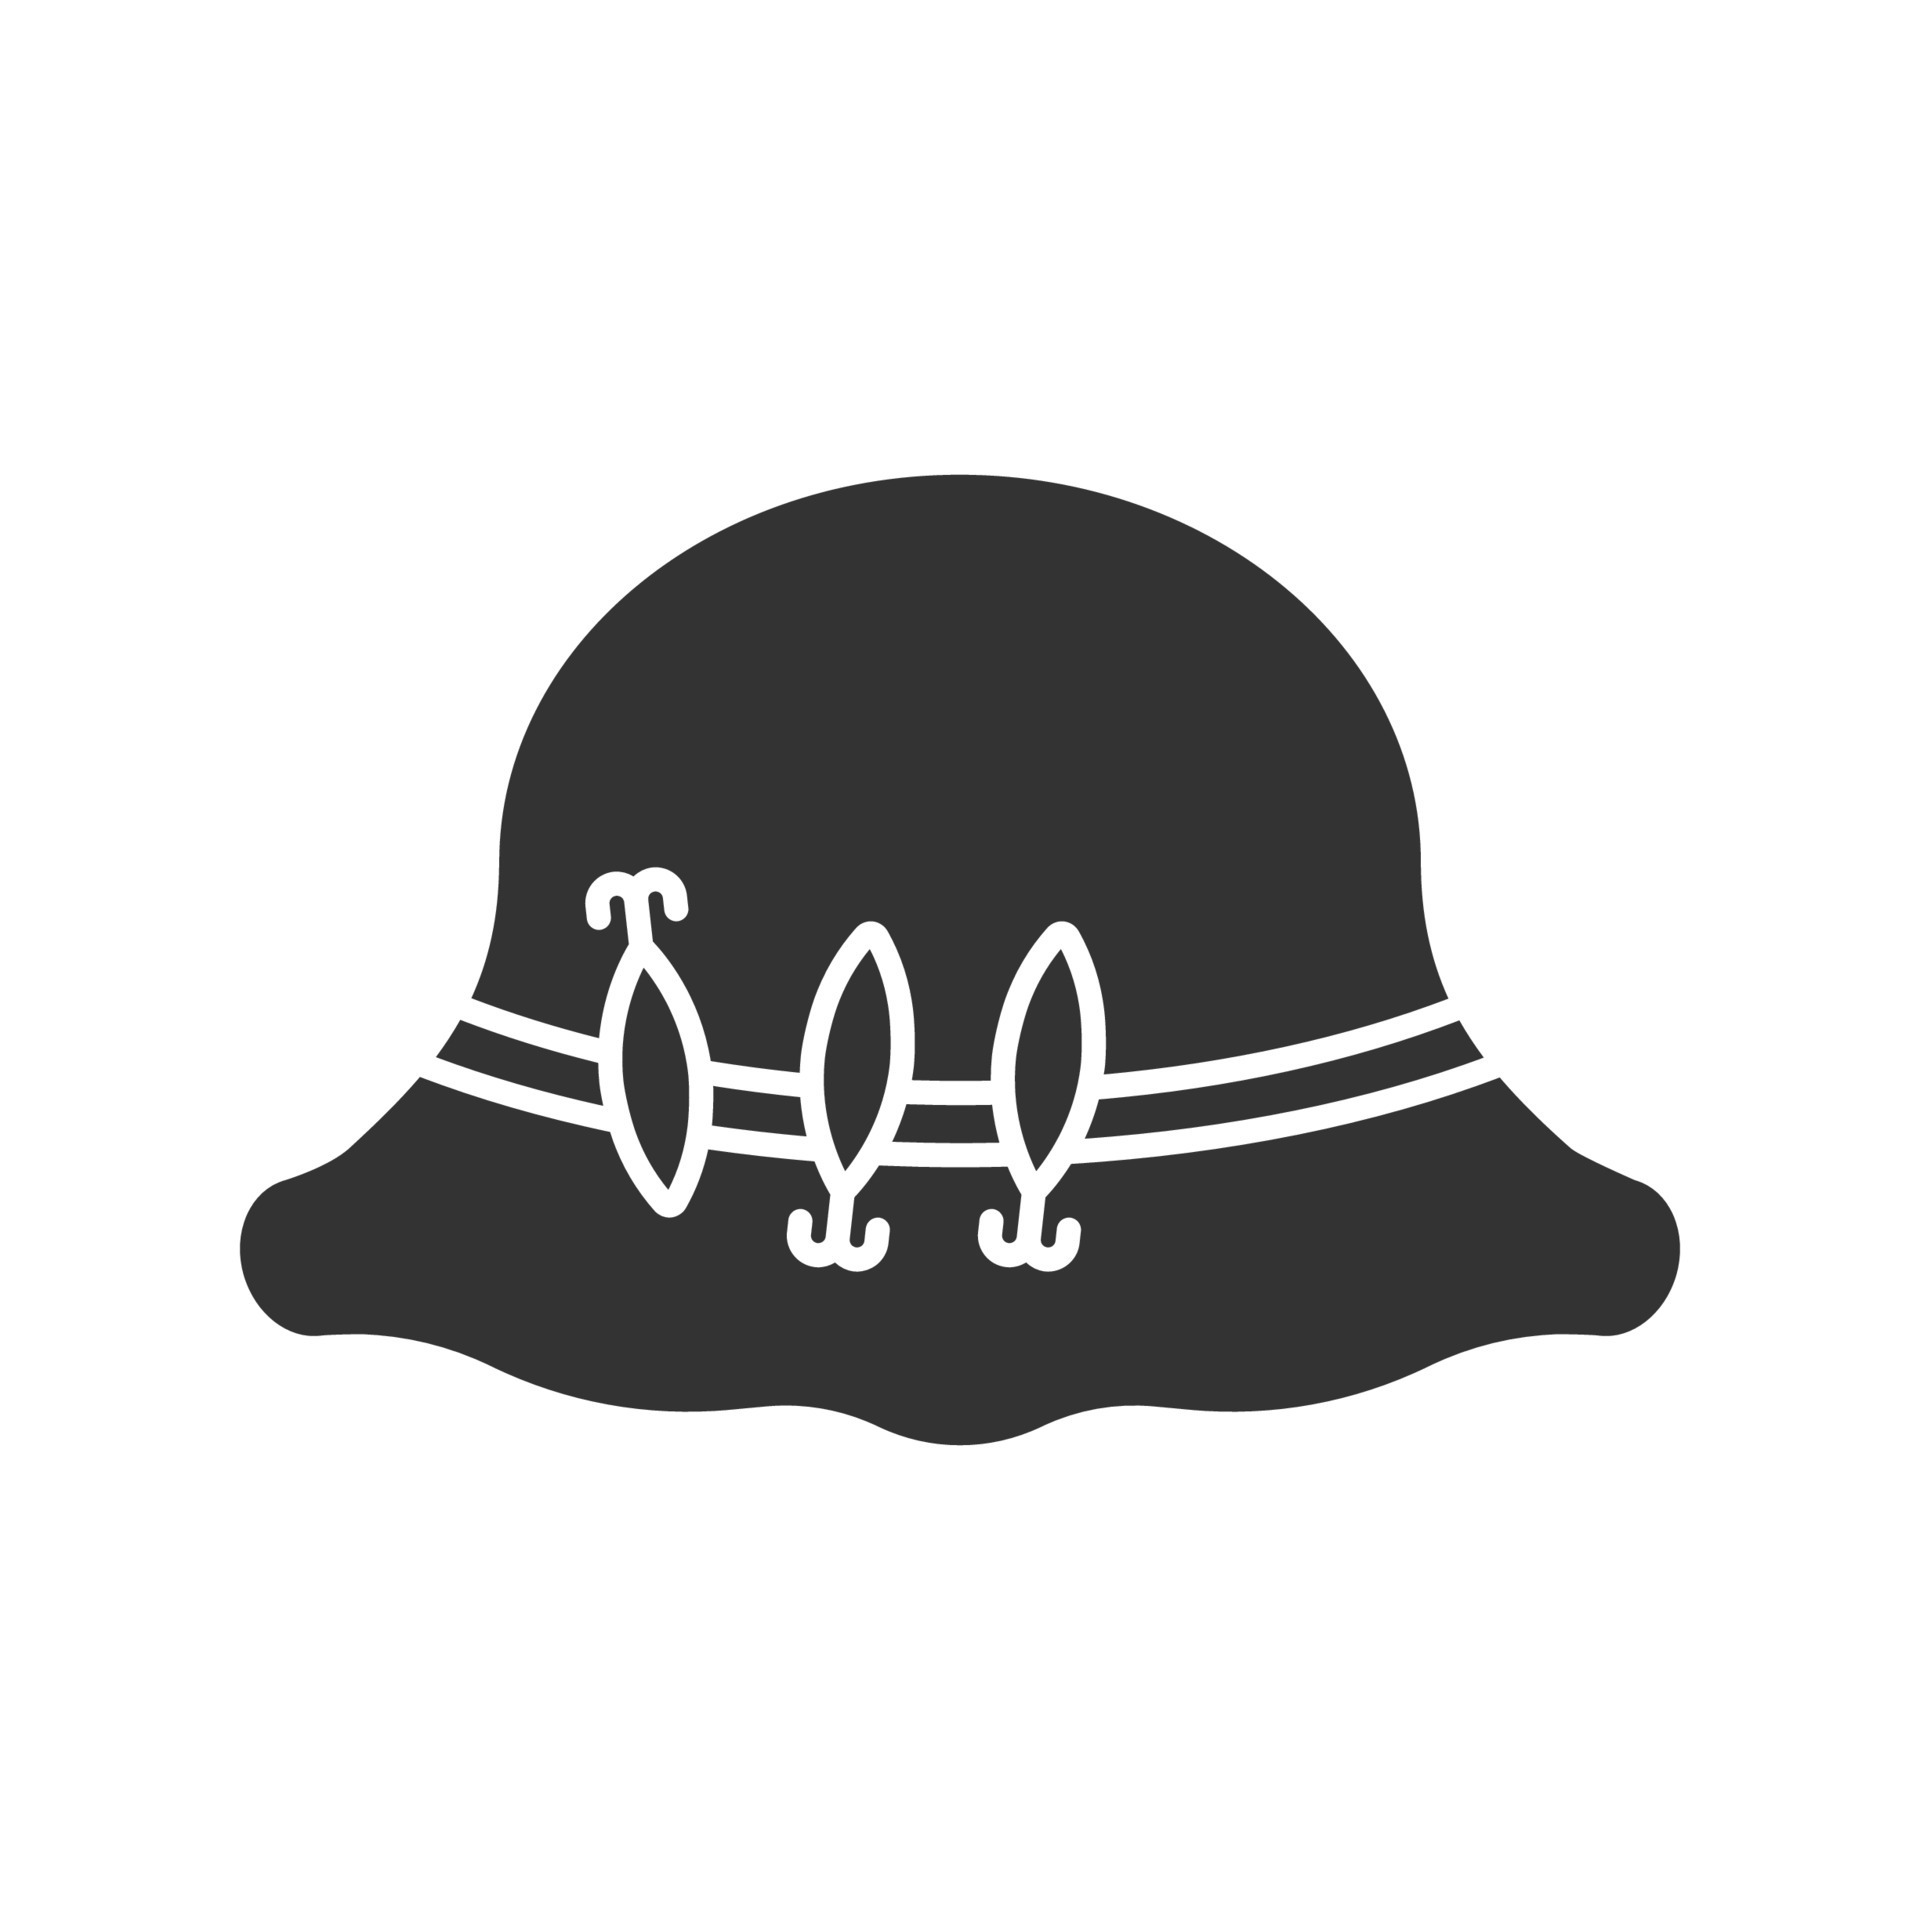 https://static.vecteezy.com/system/resources/previews/008/671/392/original/fisherman-hat-with-hooks-glyph-icon-fishing-equipment-silhouette-symbol-negative-space-isolated-illustration-vector.jpg